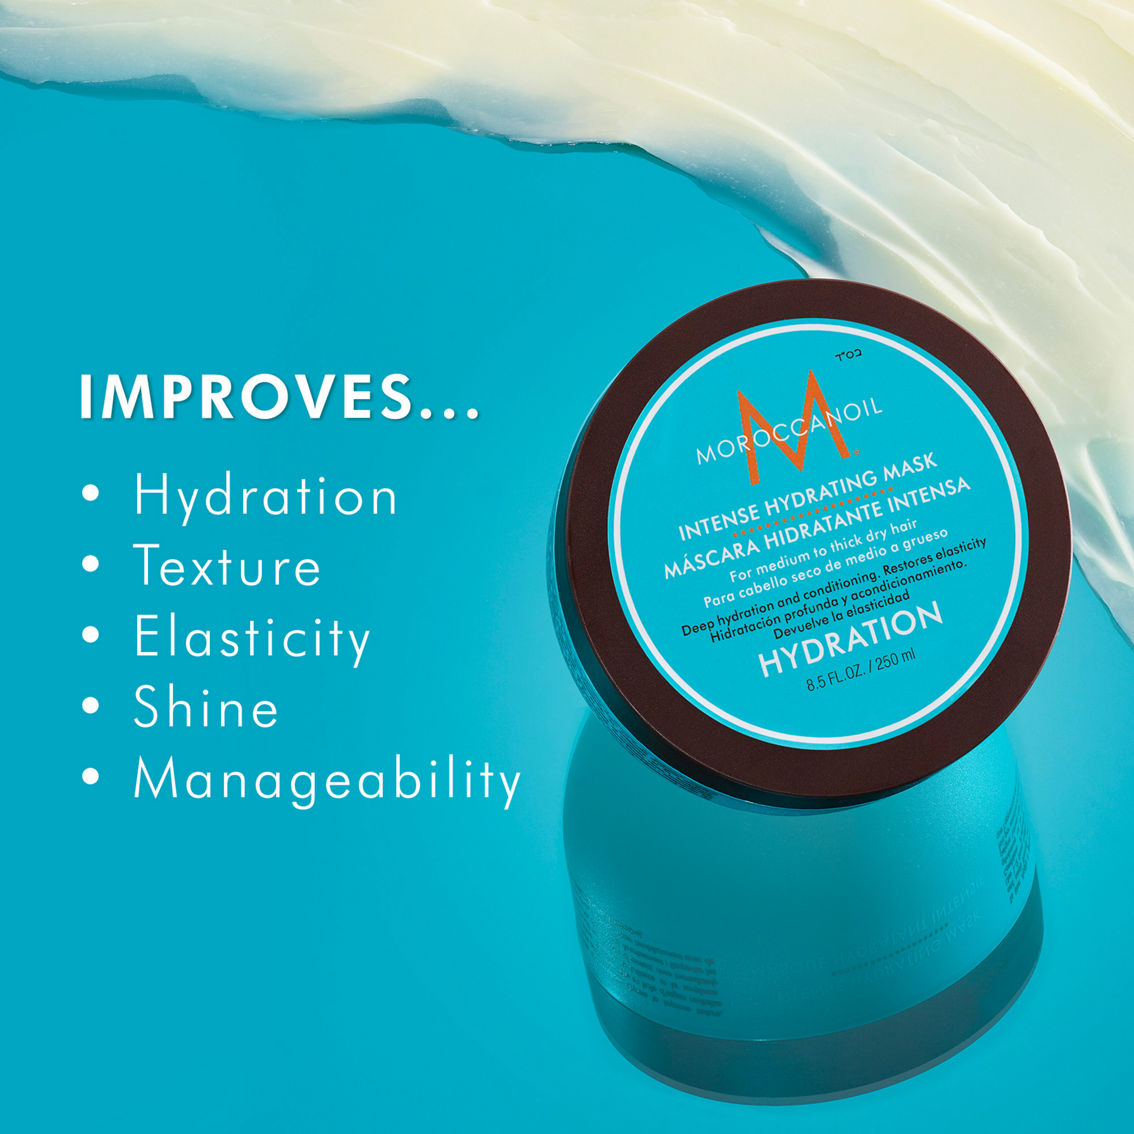 Moroccanoil Intense Hydrating Mask 8.5 oz. - Image 3 of 3